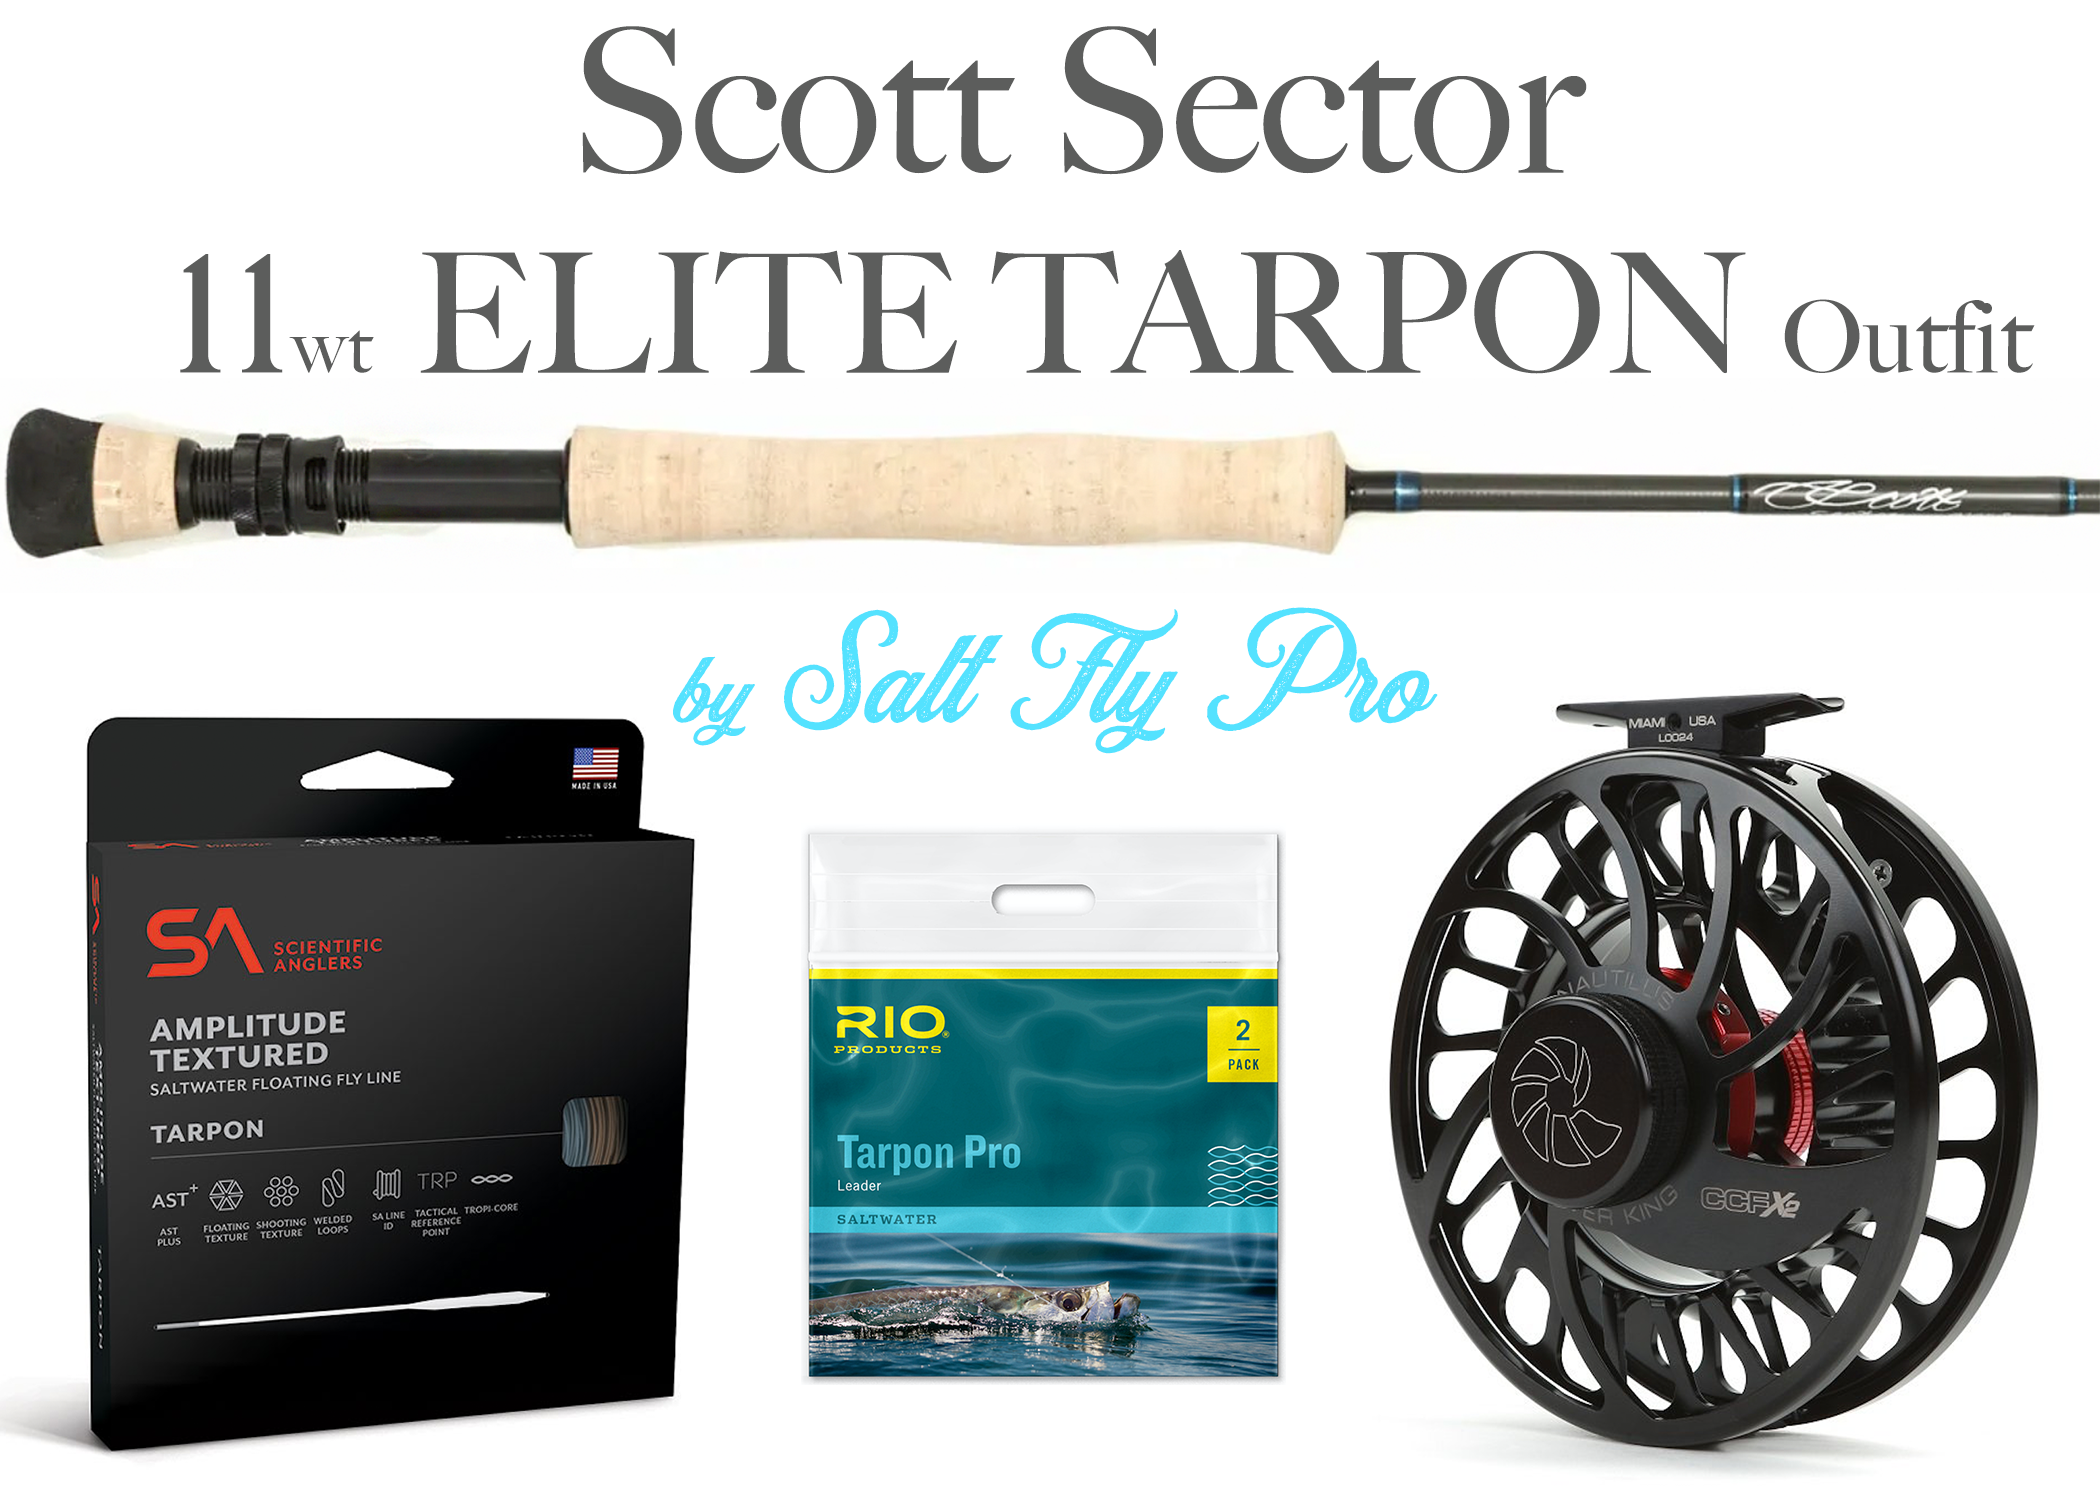 Scott Sector 12wt Tarpon fly rod combo outfit Nautilus Silver King reel